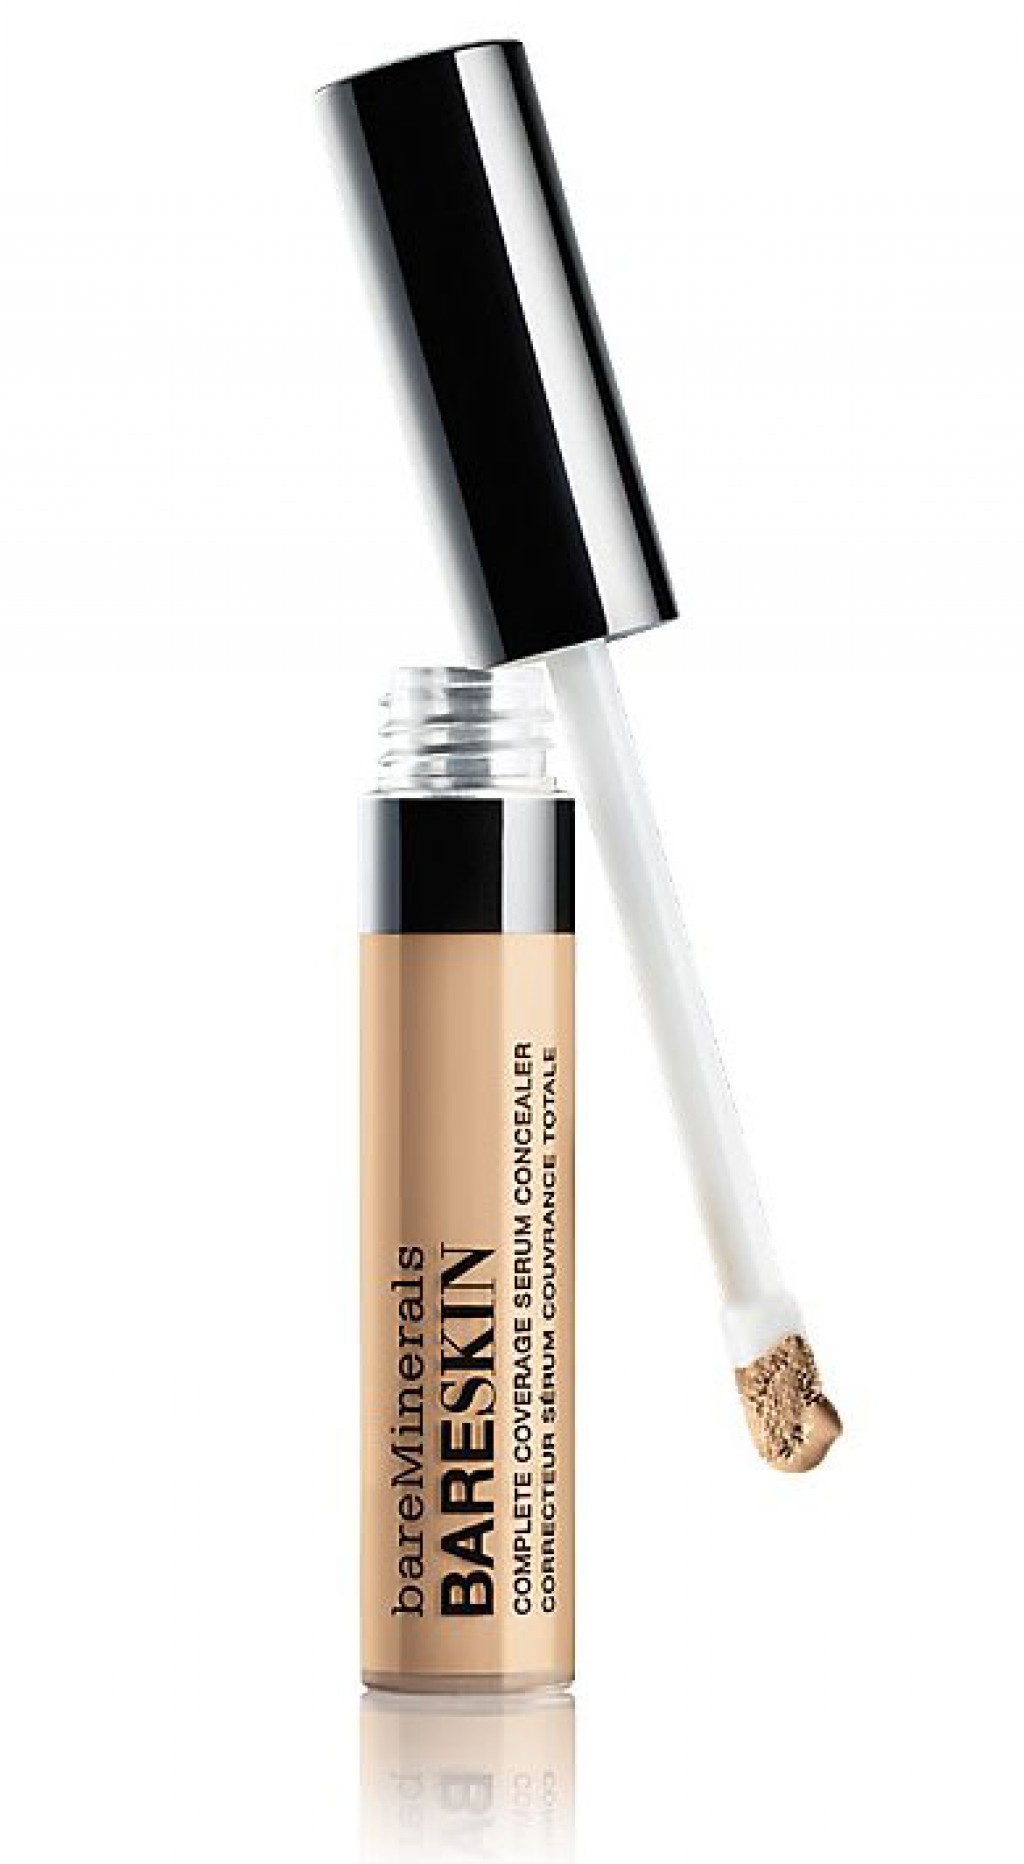 id bare minerals concealer